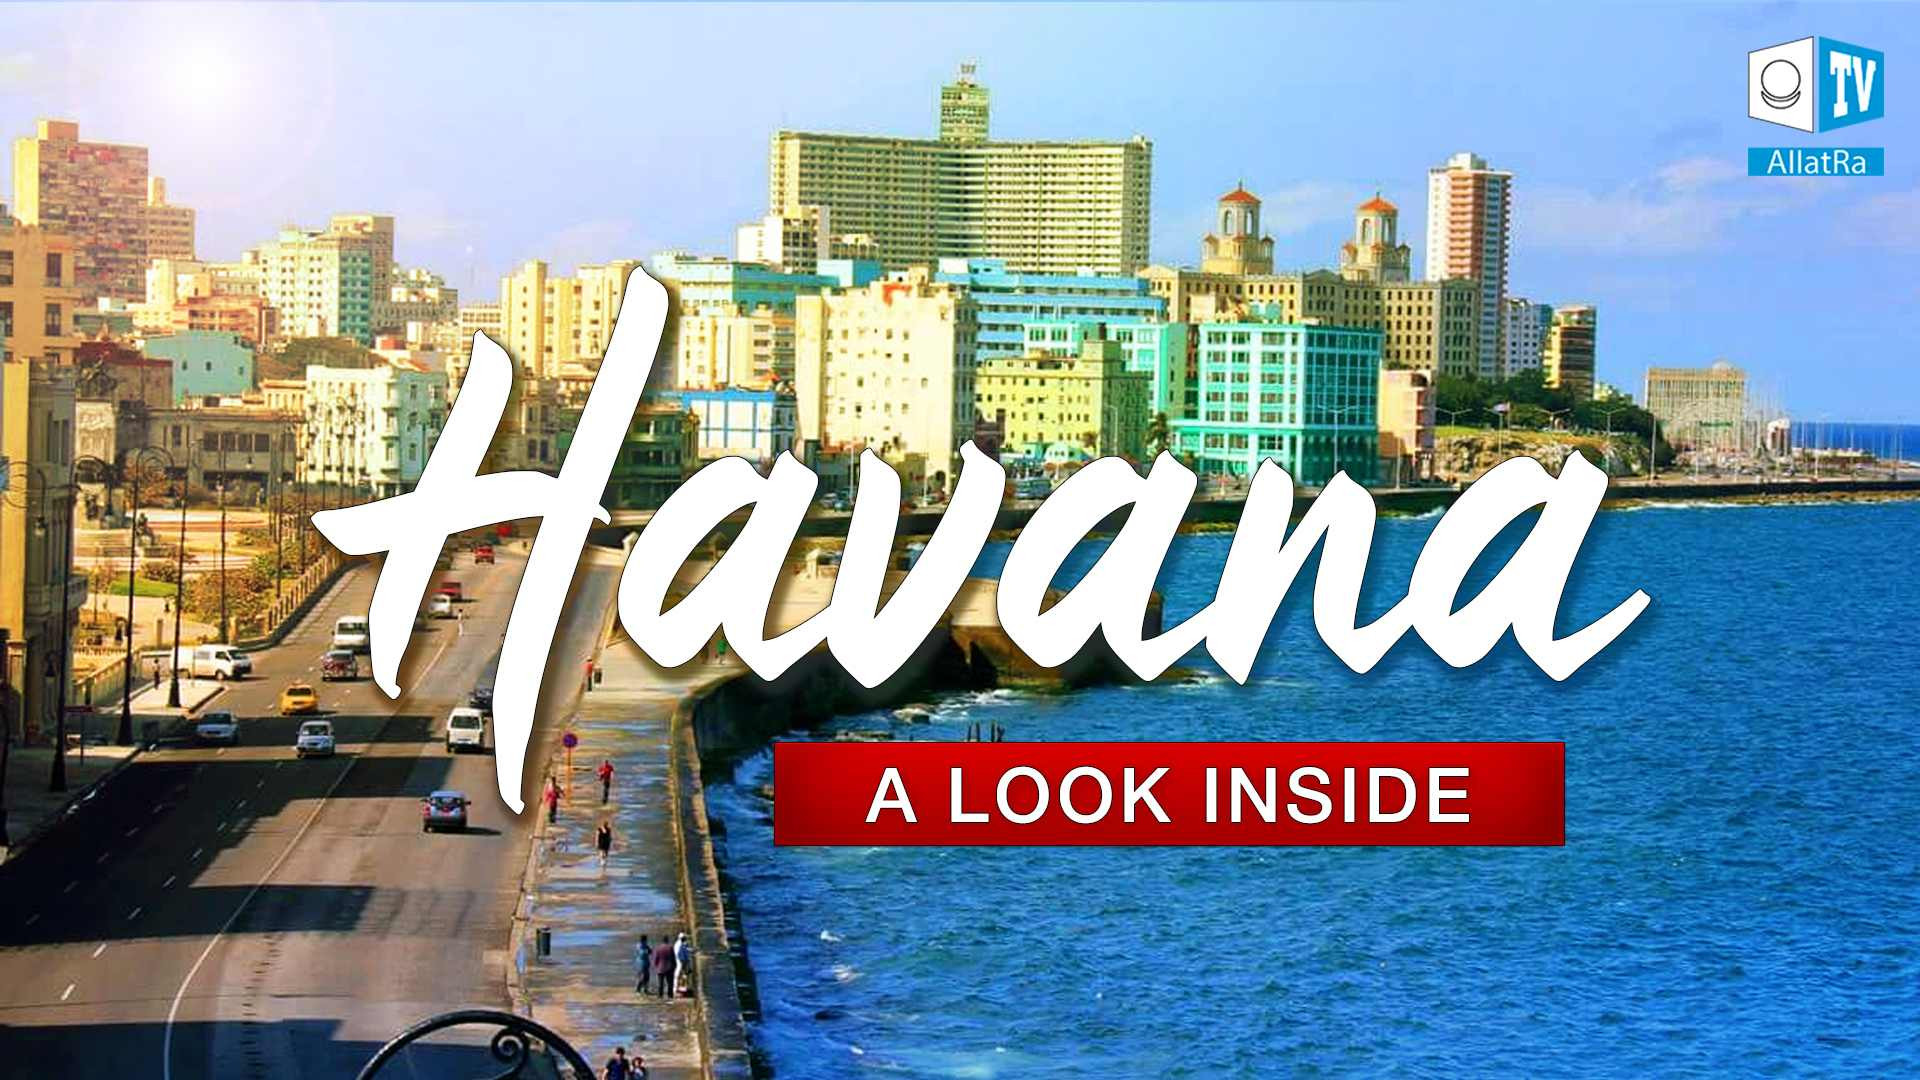 HAVANA. People Who Will Amaze You | OFFICIAL TRAILER